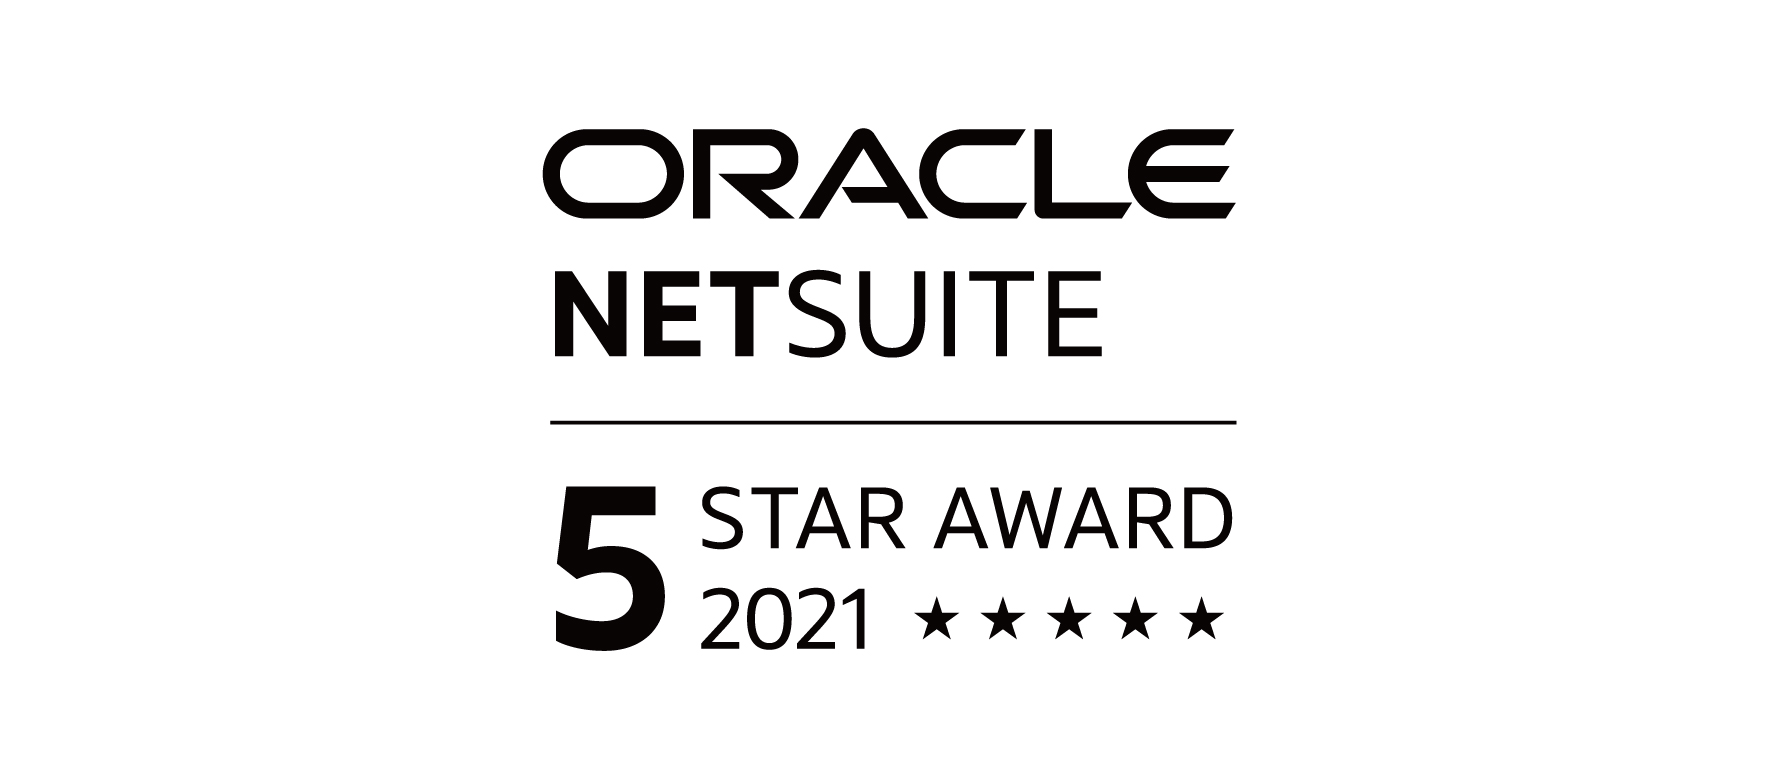 introv Limited Oracle NetSuite Alliance Partner